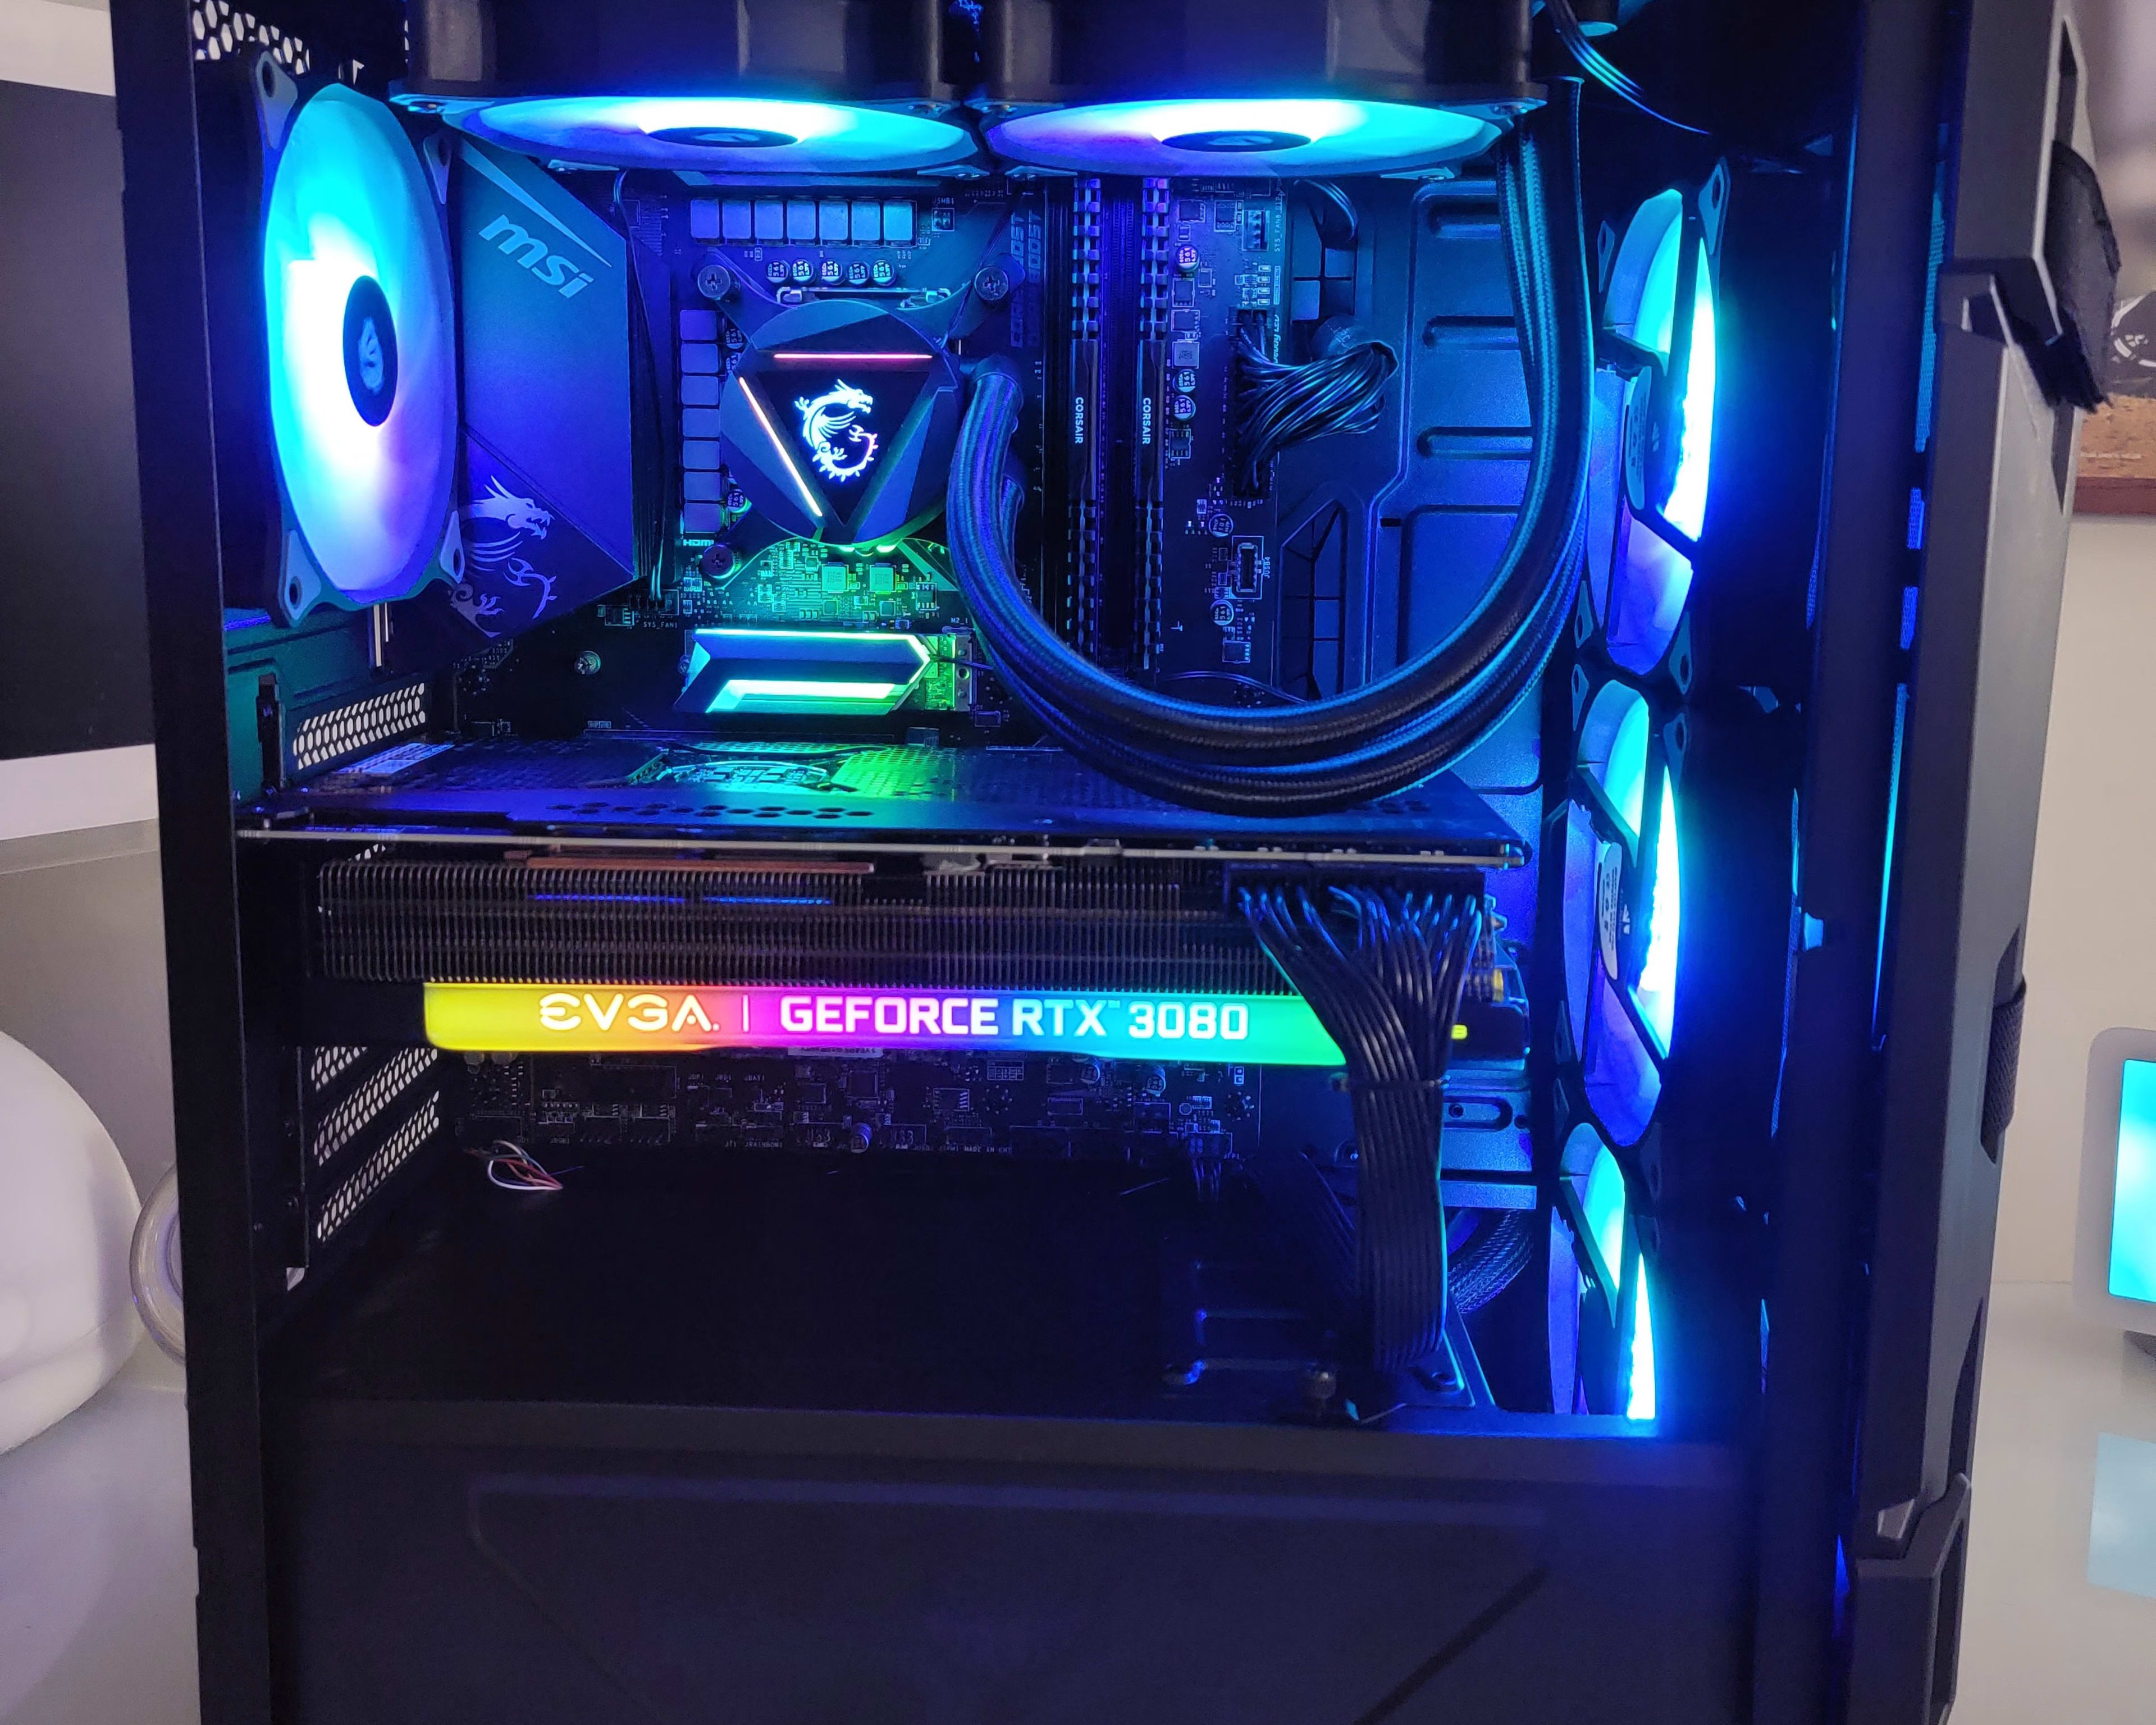 CYBER SALE! High End Gaming PC - Featuring Intel i9 10850k and RTX 3080 FTW3